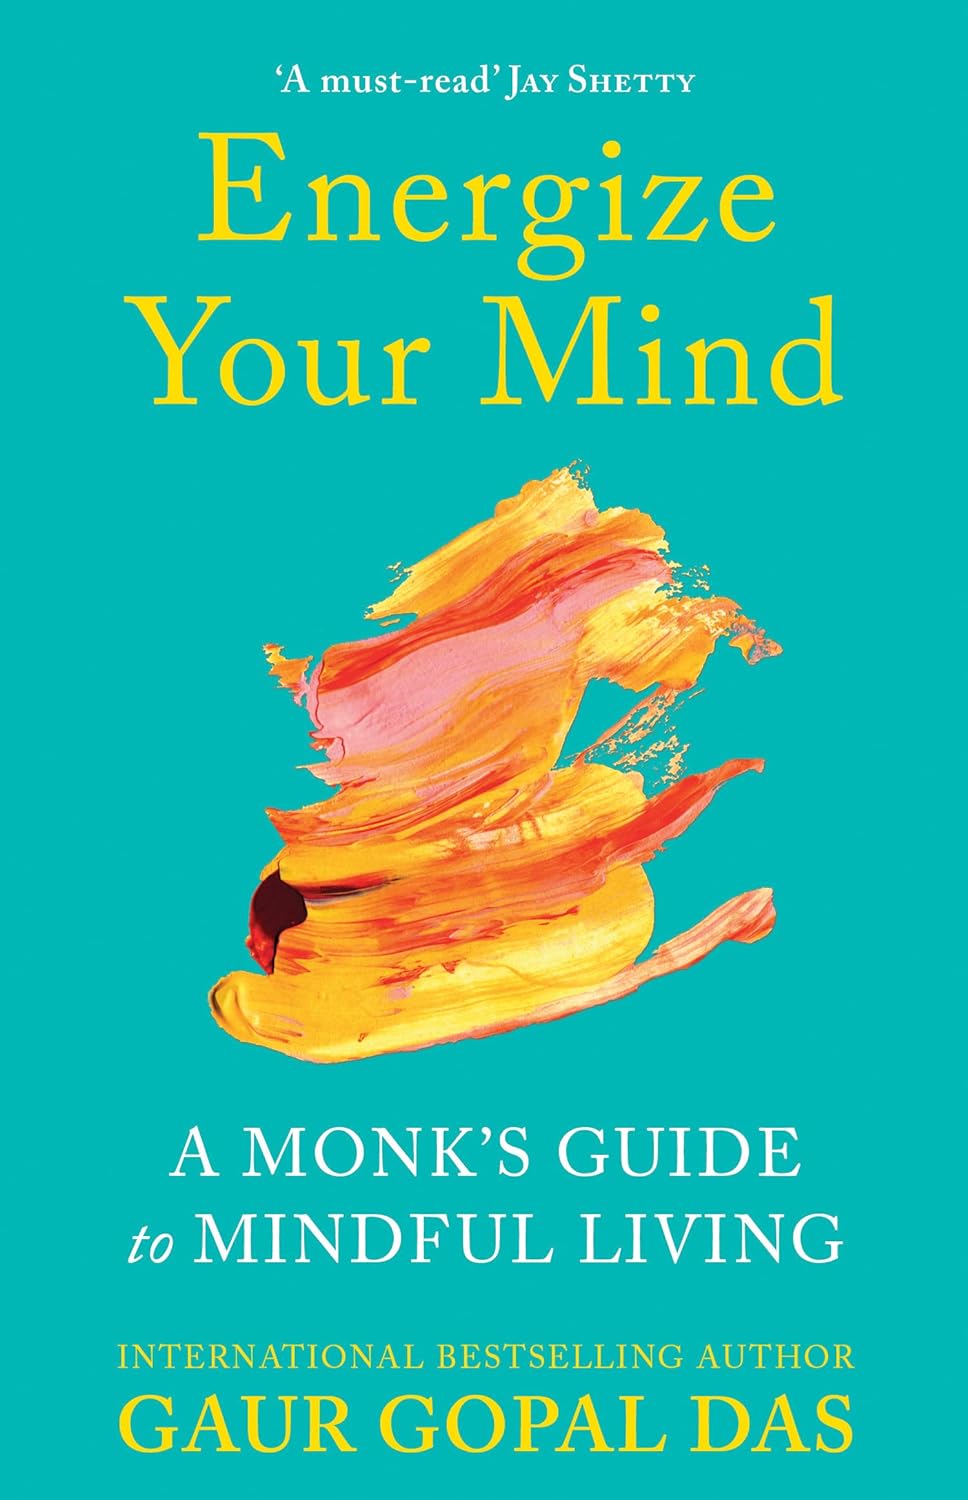 Energize Your Mind A Monk's Guide to Mindful Living - SureShot Books Publishing LLC